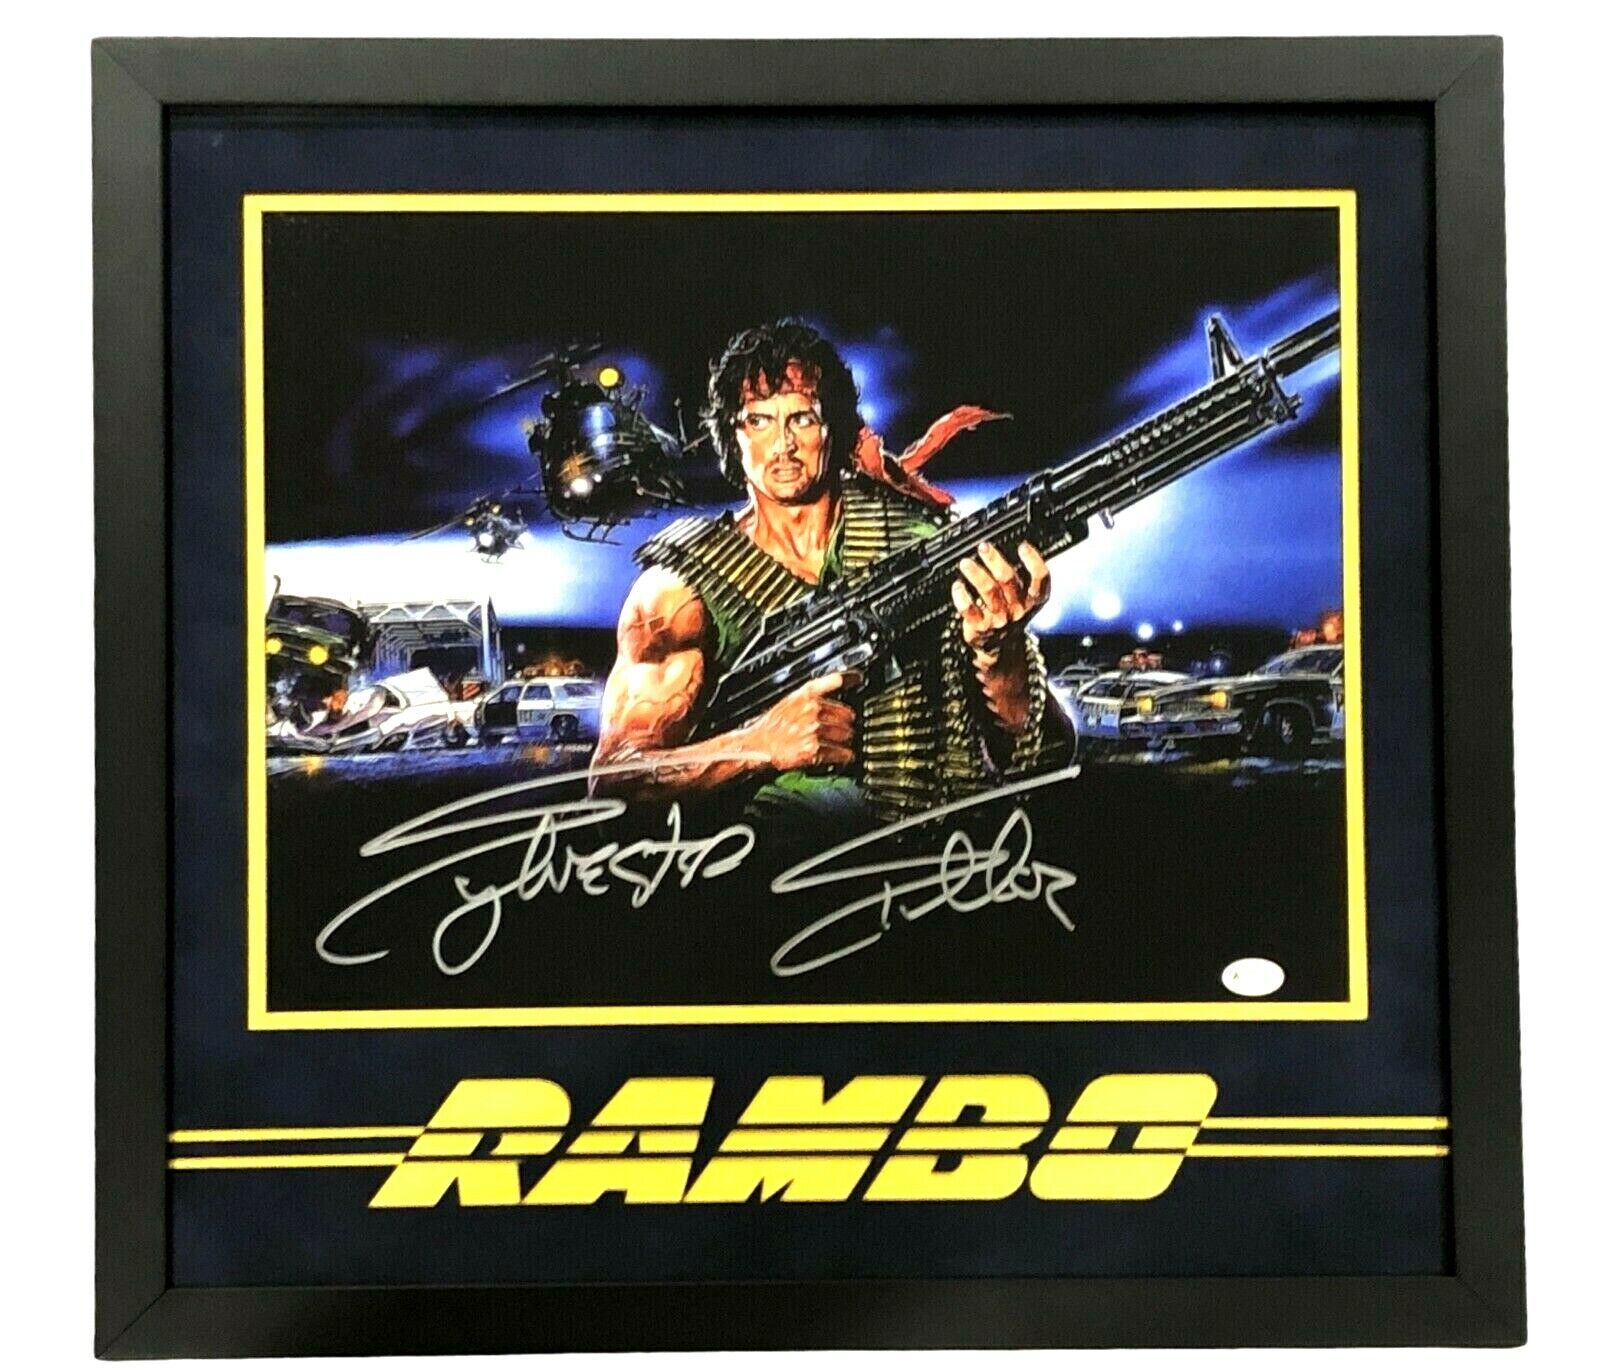 SYLVESTER STALLONE HAND SIGNED RAMBO AUTOGRAPHED 14X11 Photo Poster painting FRAMED WITH COA